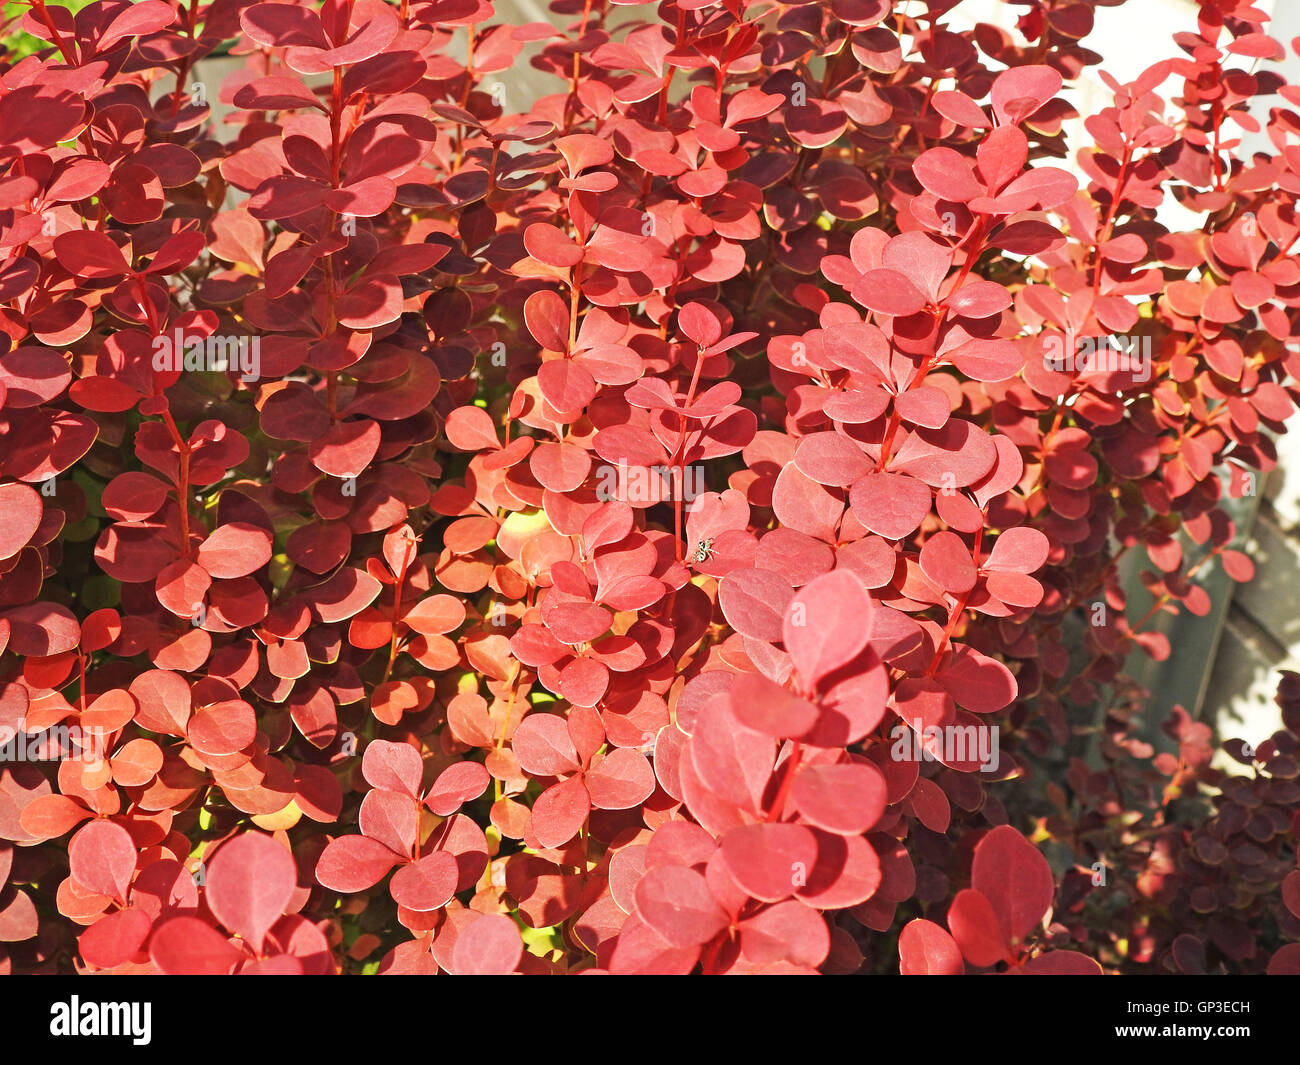 The red barberry bushes Stock Photo